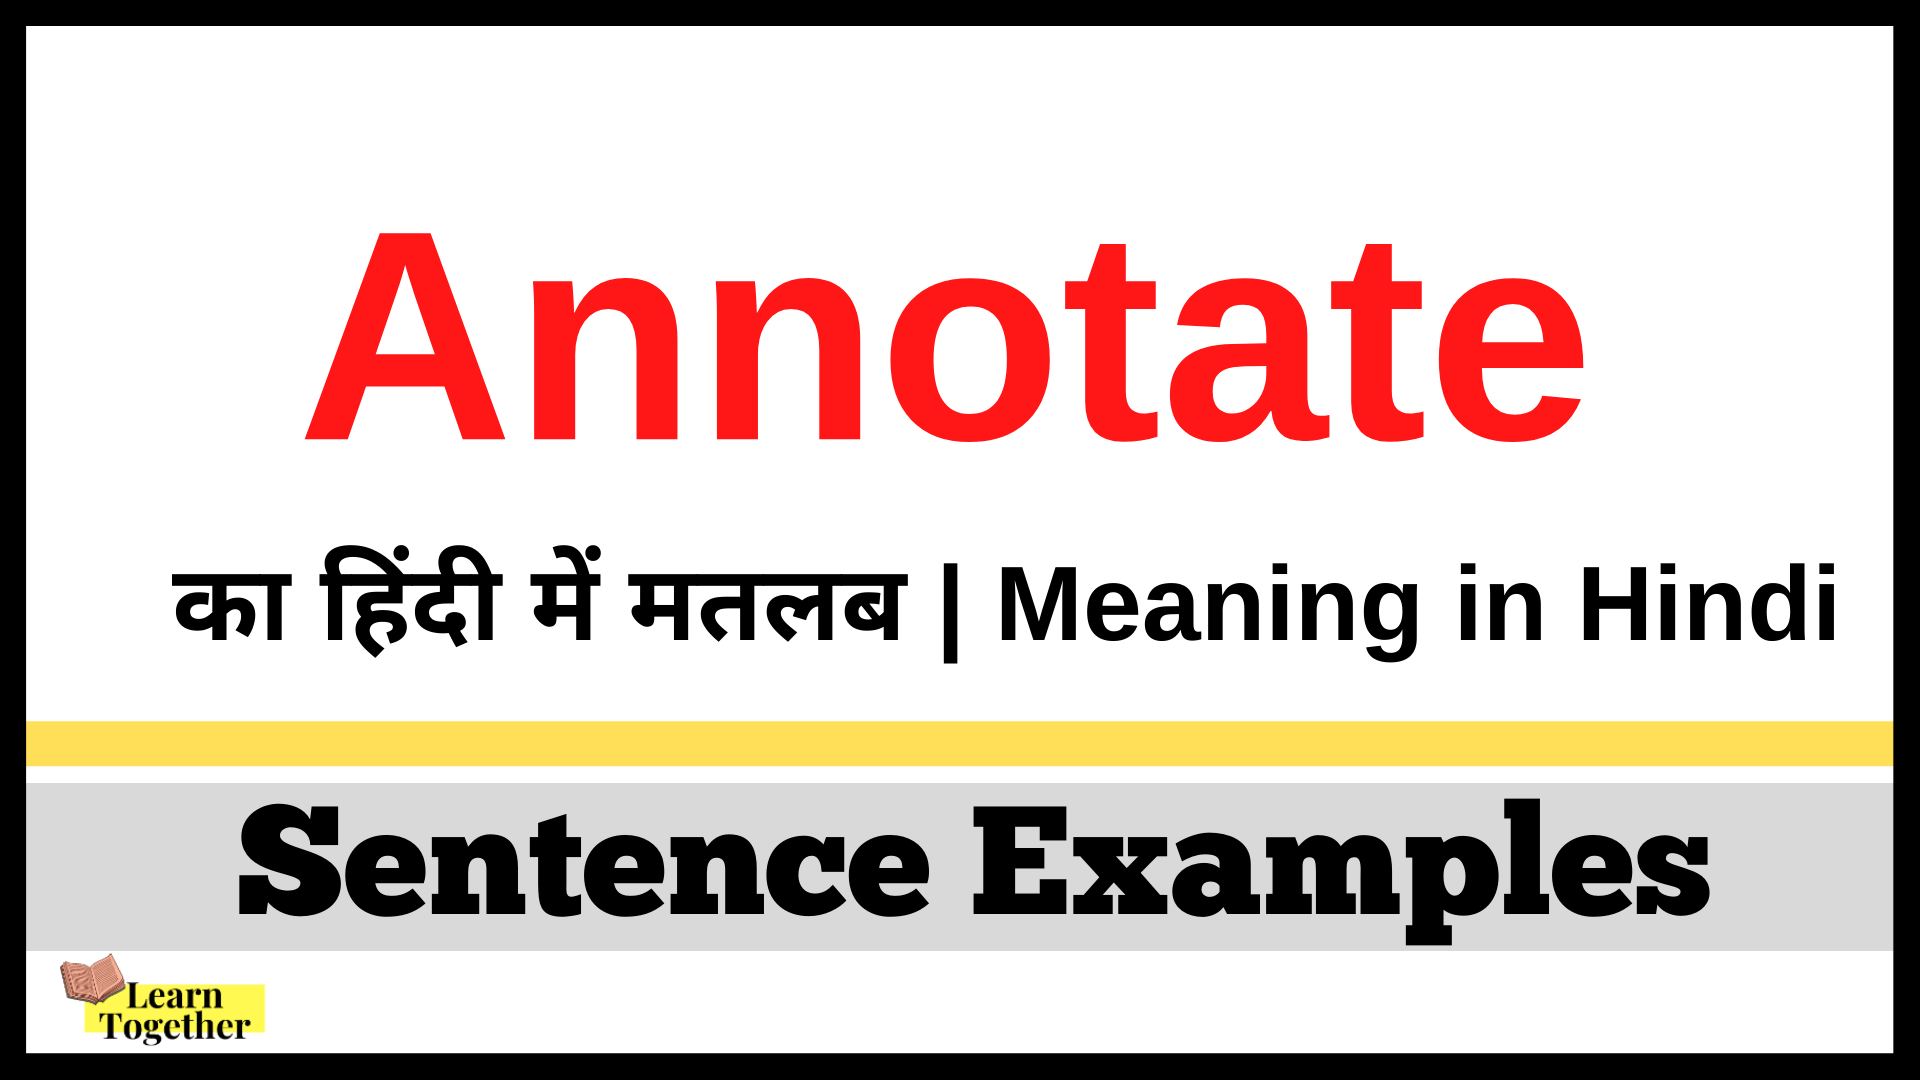 Annotate Meaning in Hindi.png